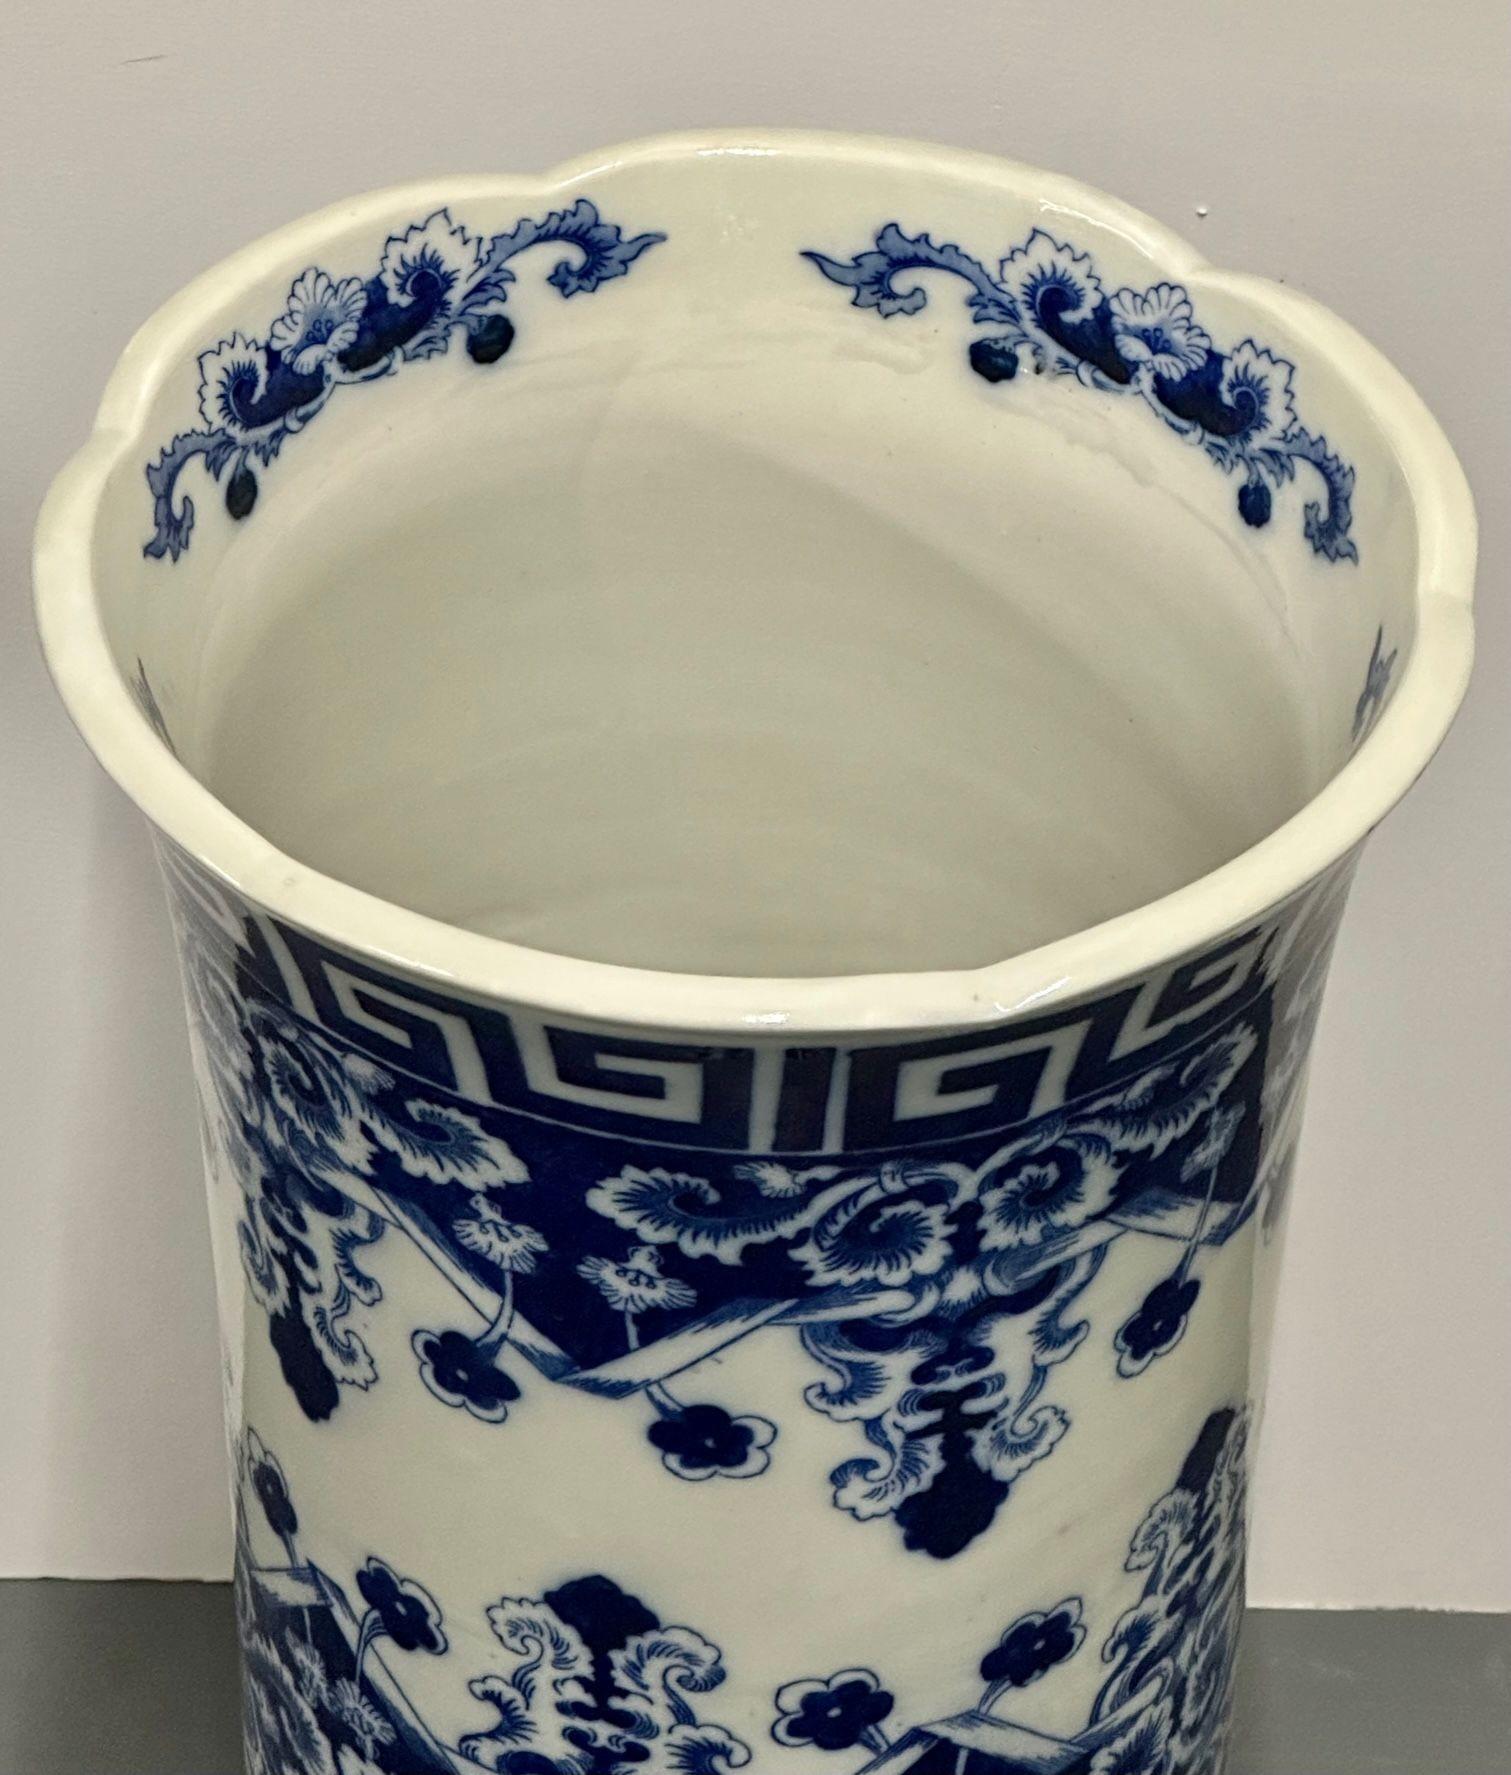 Oriental Porcelain Flow Blue White Umbrella Stand, Large Vase, Floral Decorated In Good Condition For Sale In Stamford, CT